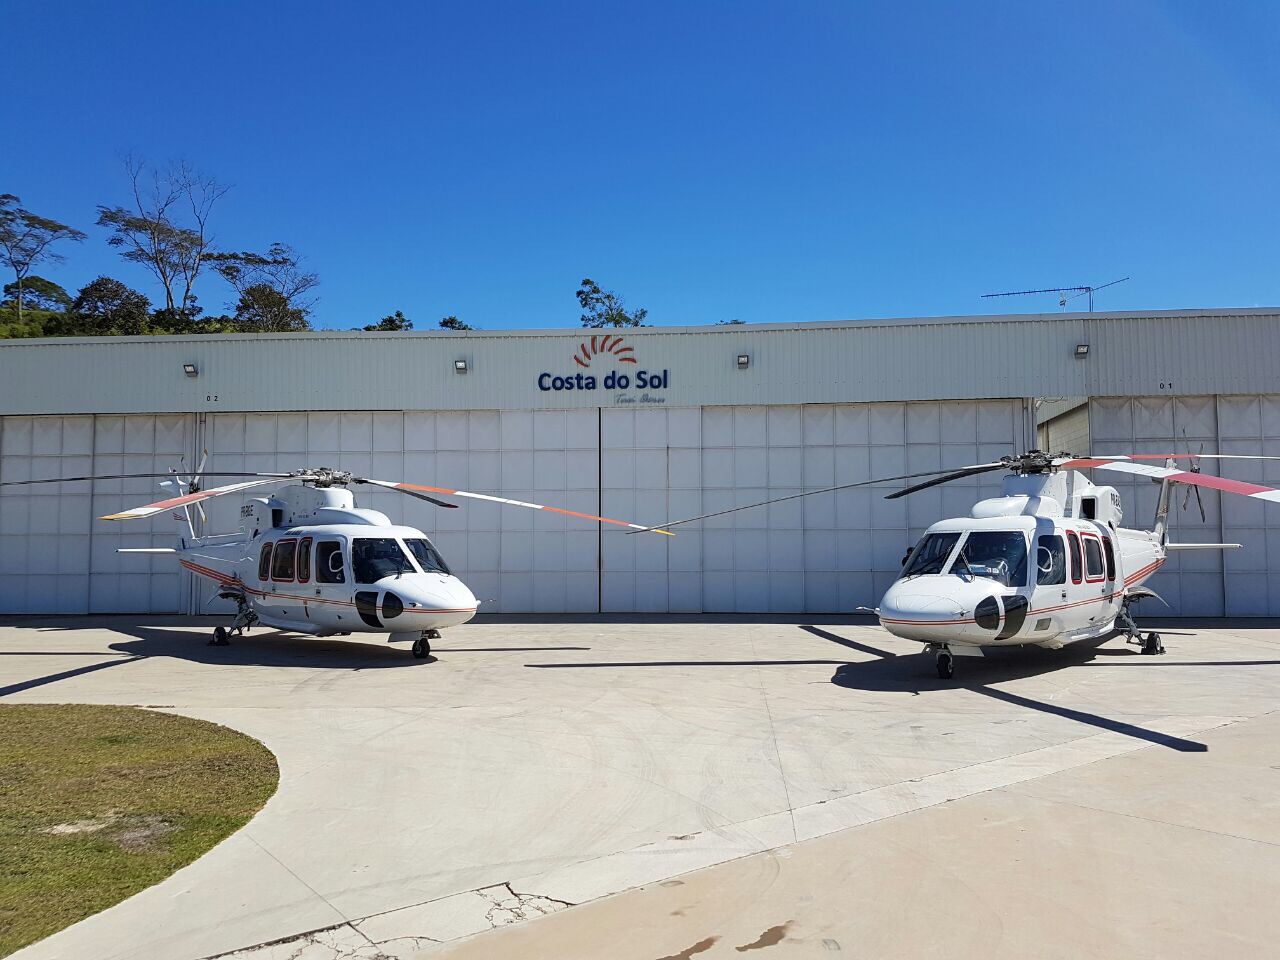 The addition of the offshore configured Sikorsky S-76C+ helicopter will follow a previous lease agreement for a similar offshore S-76C+. Costa do Sol Photo